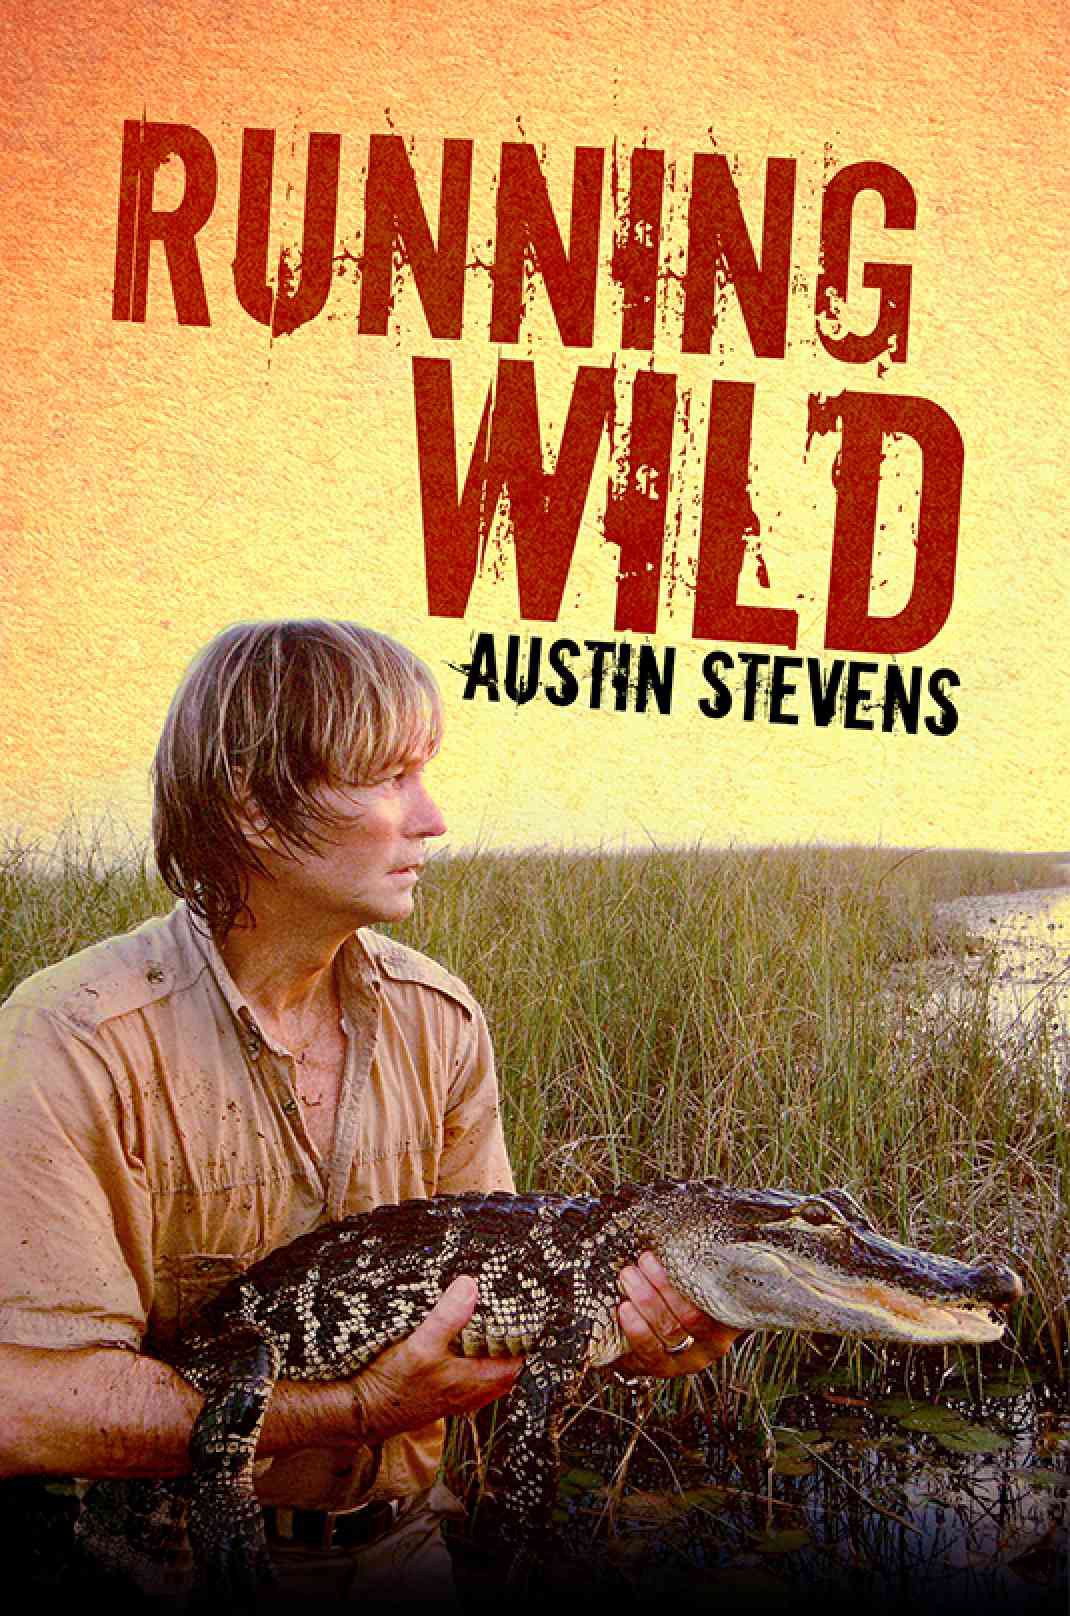 Austin Steven’s Autobiography is now available online and at bookstores